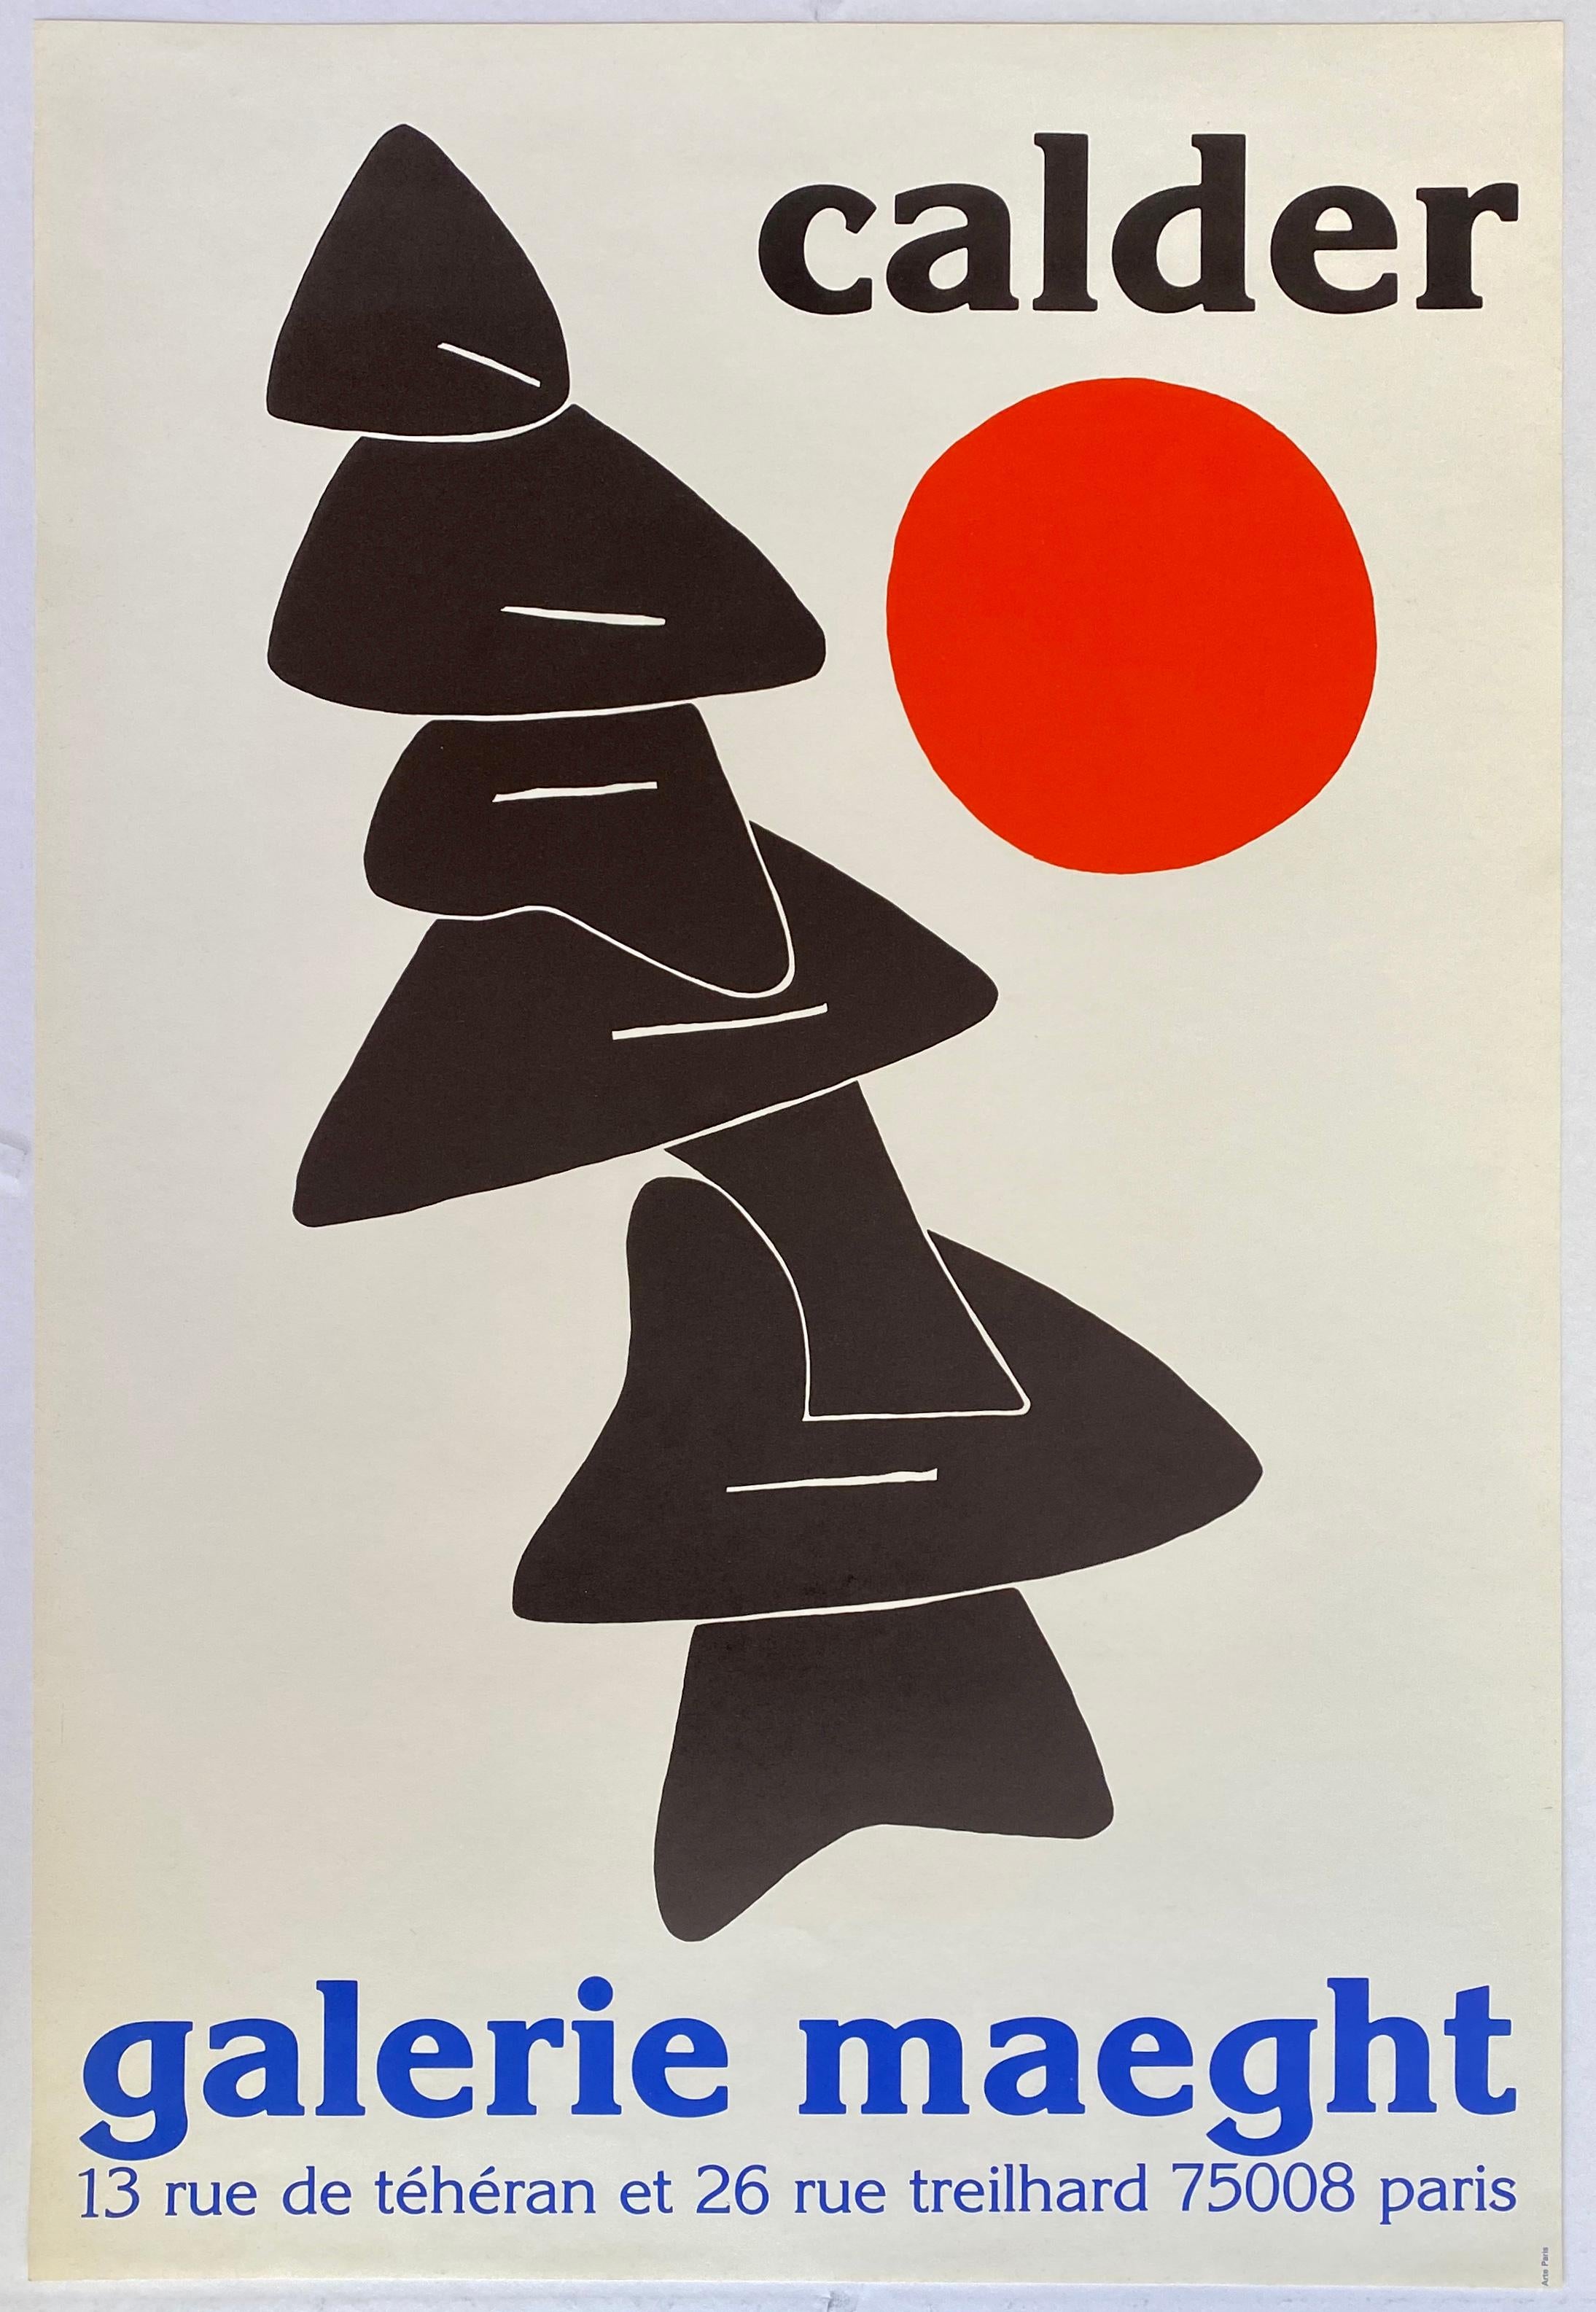 Alexander Calder Paris, c. 1976: vintage lithographic exhibition poster. An original 1st printing in very good vintage condition; stored flat, well-preserved with crisp colors. 

Offset lithograph. 20 x 28.5 inches. 
Published by Galerie Maeght.